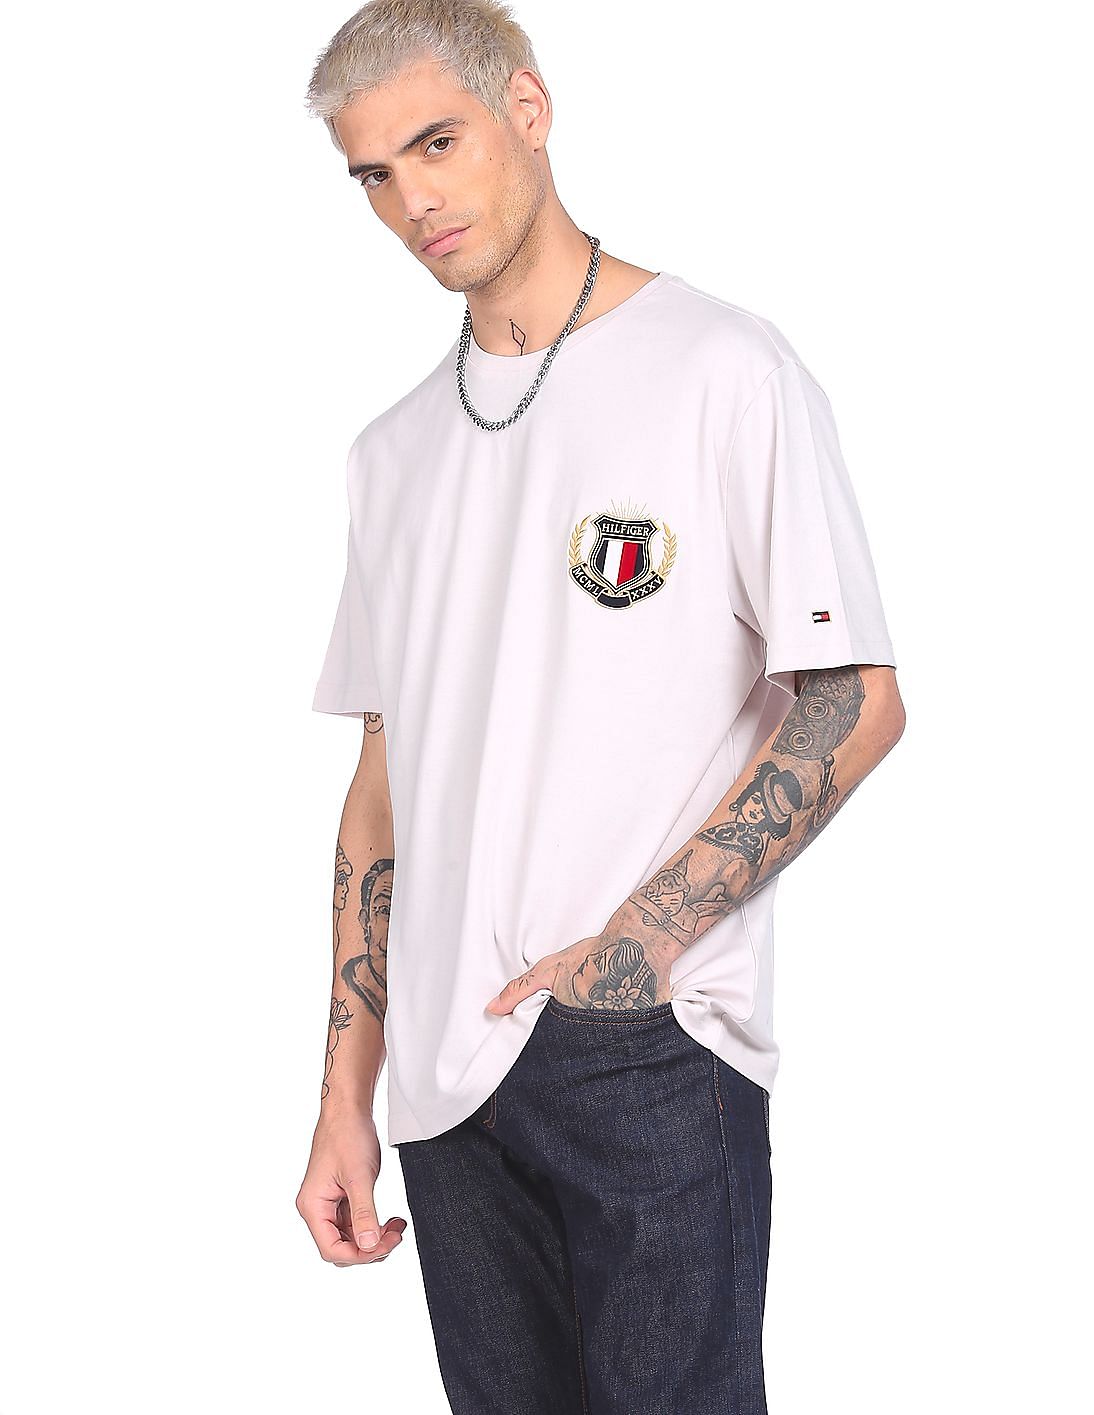 Tommy Hilfiger Back Logo Print Classic Fit T-shirt in White for